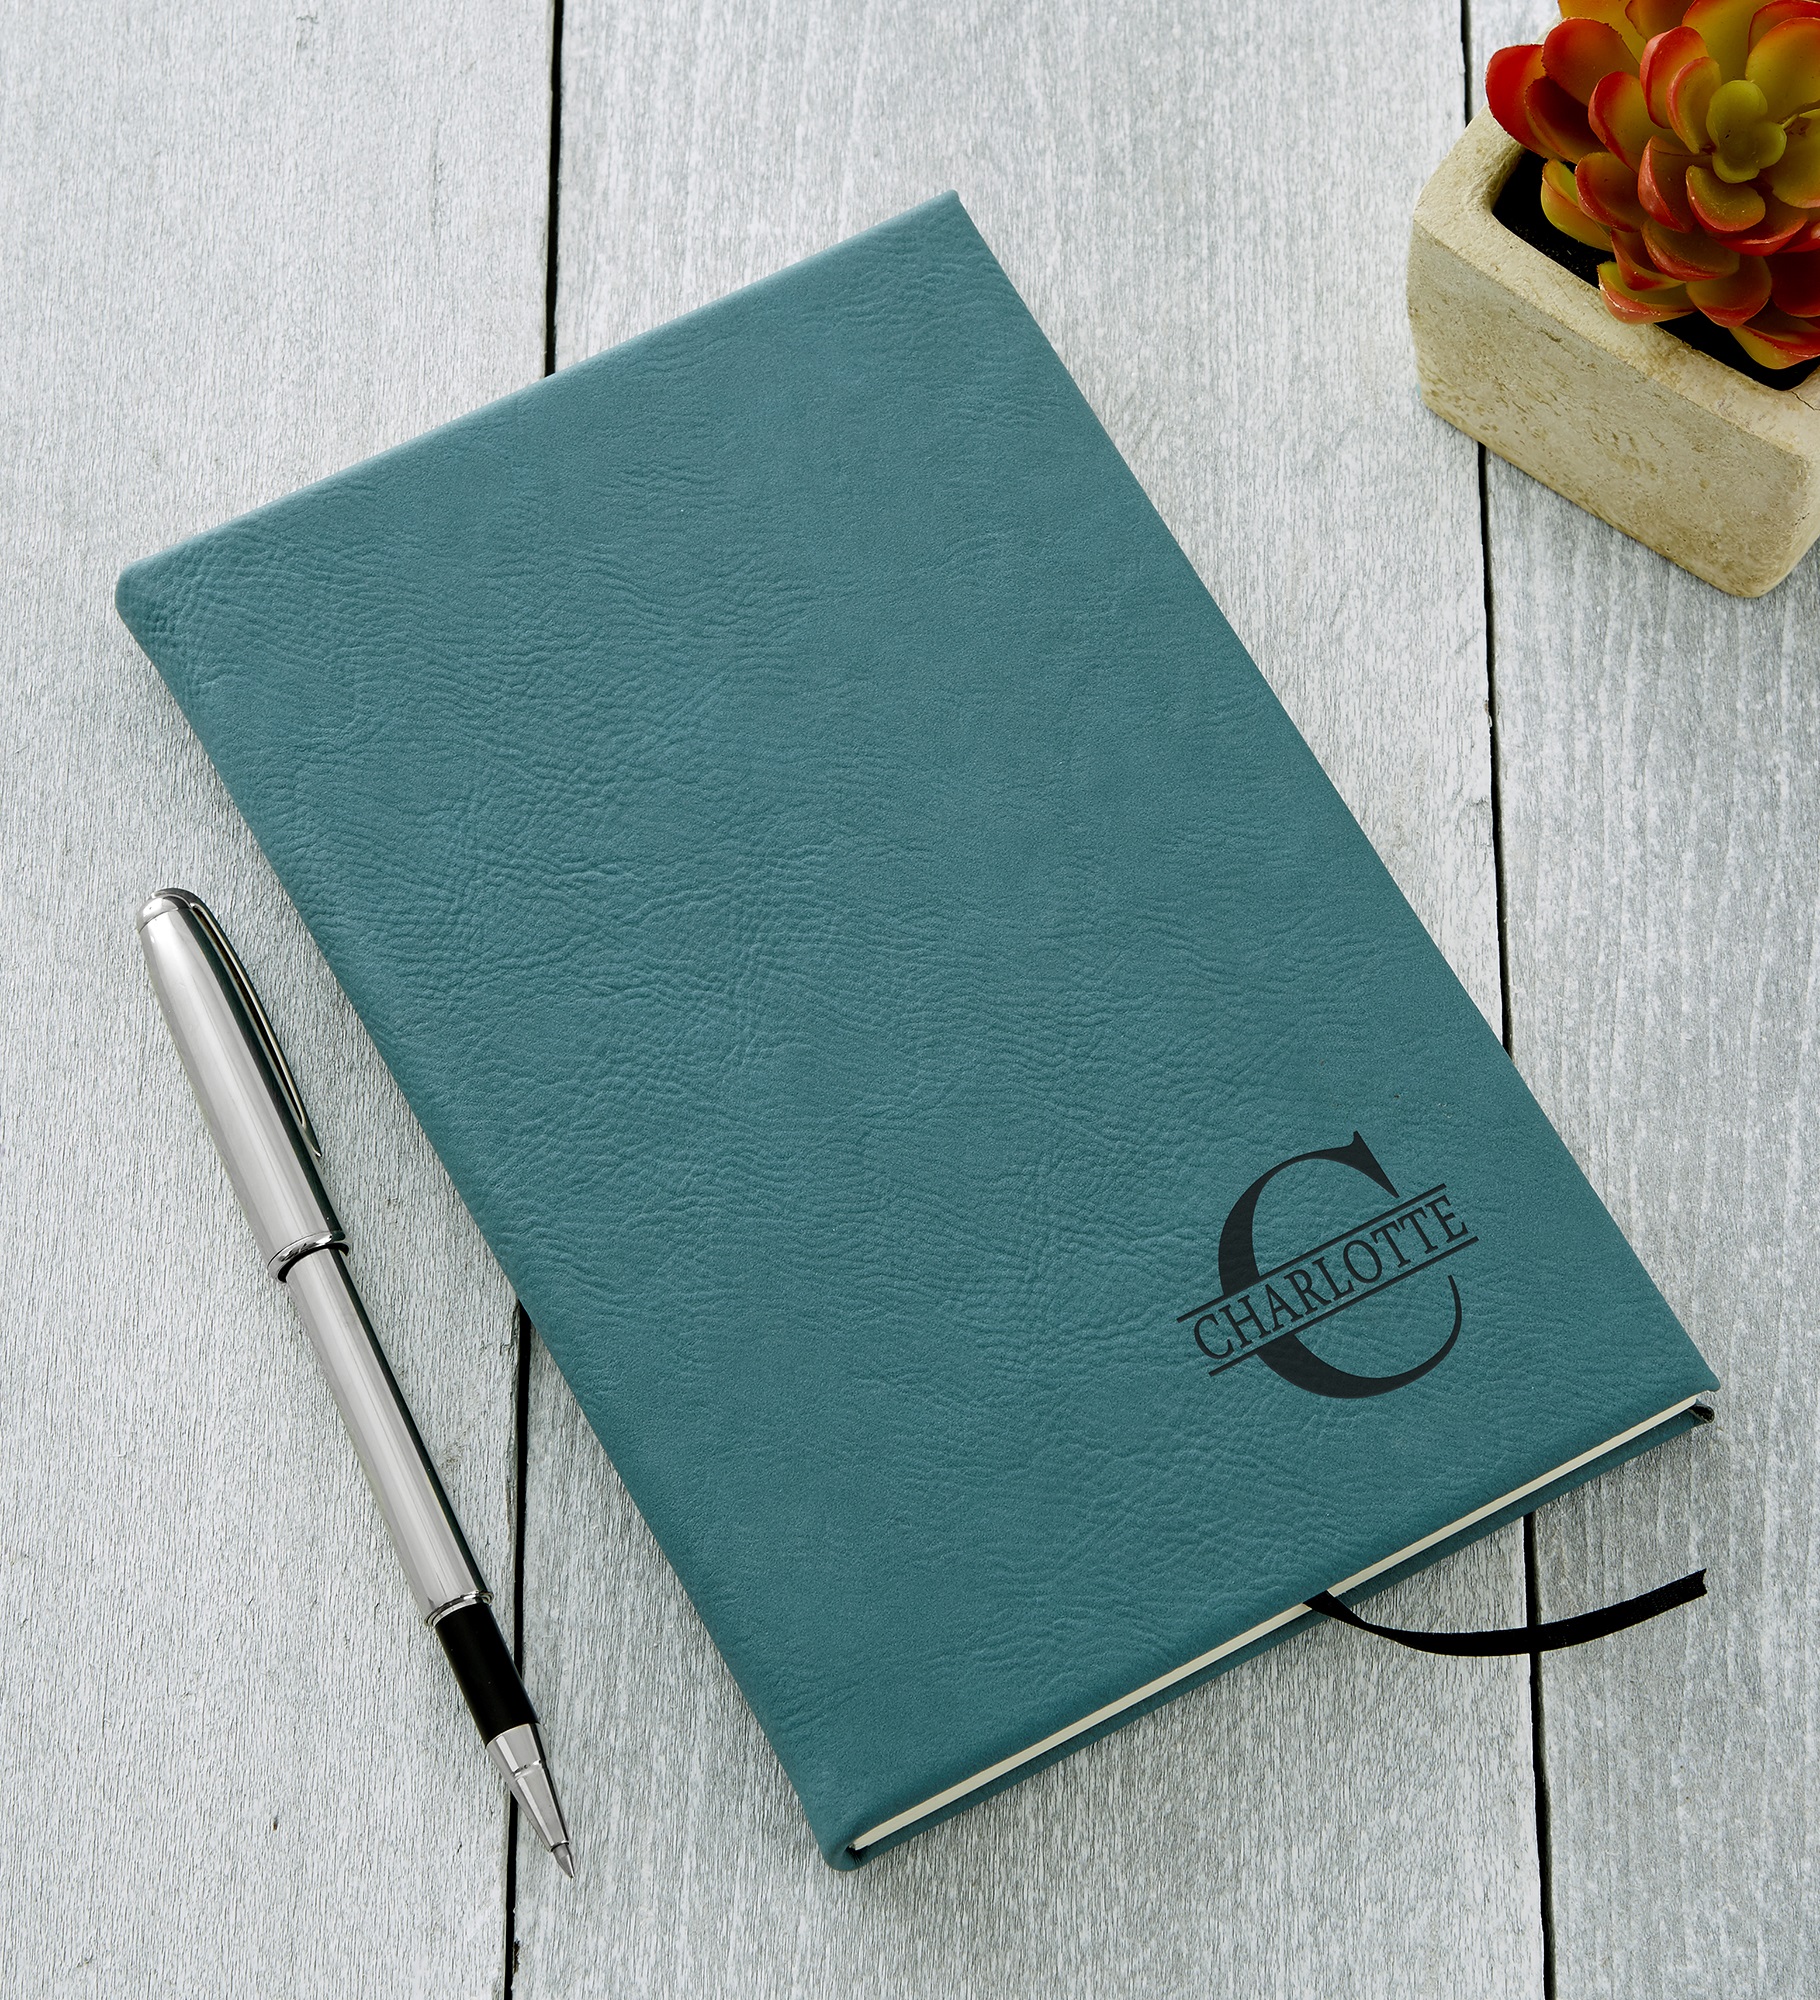 Namely Yours Personalized Writing Journal